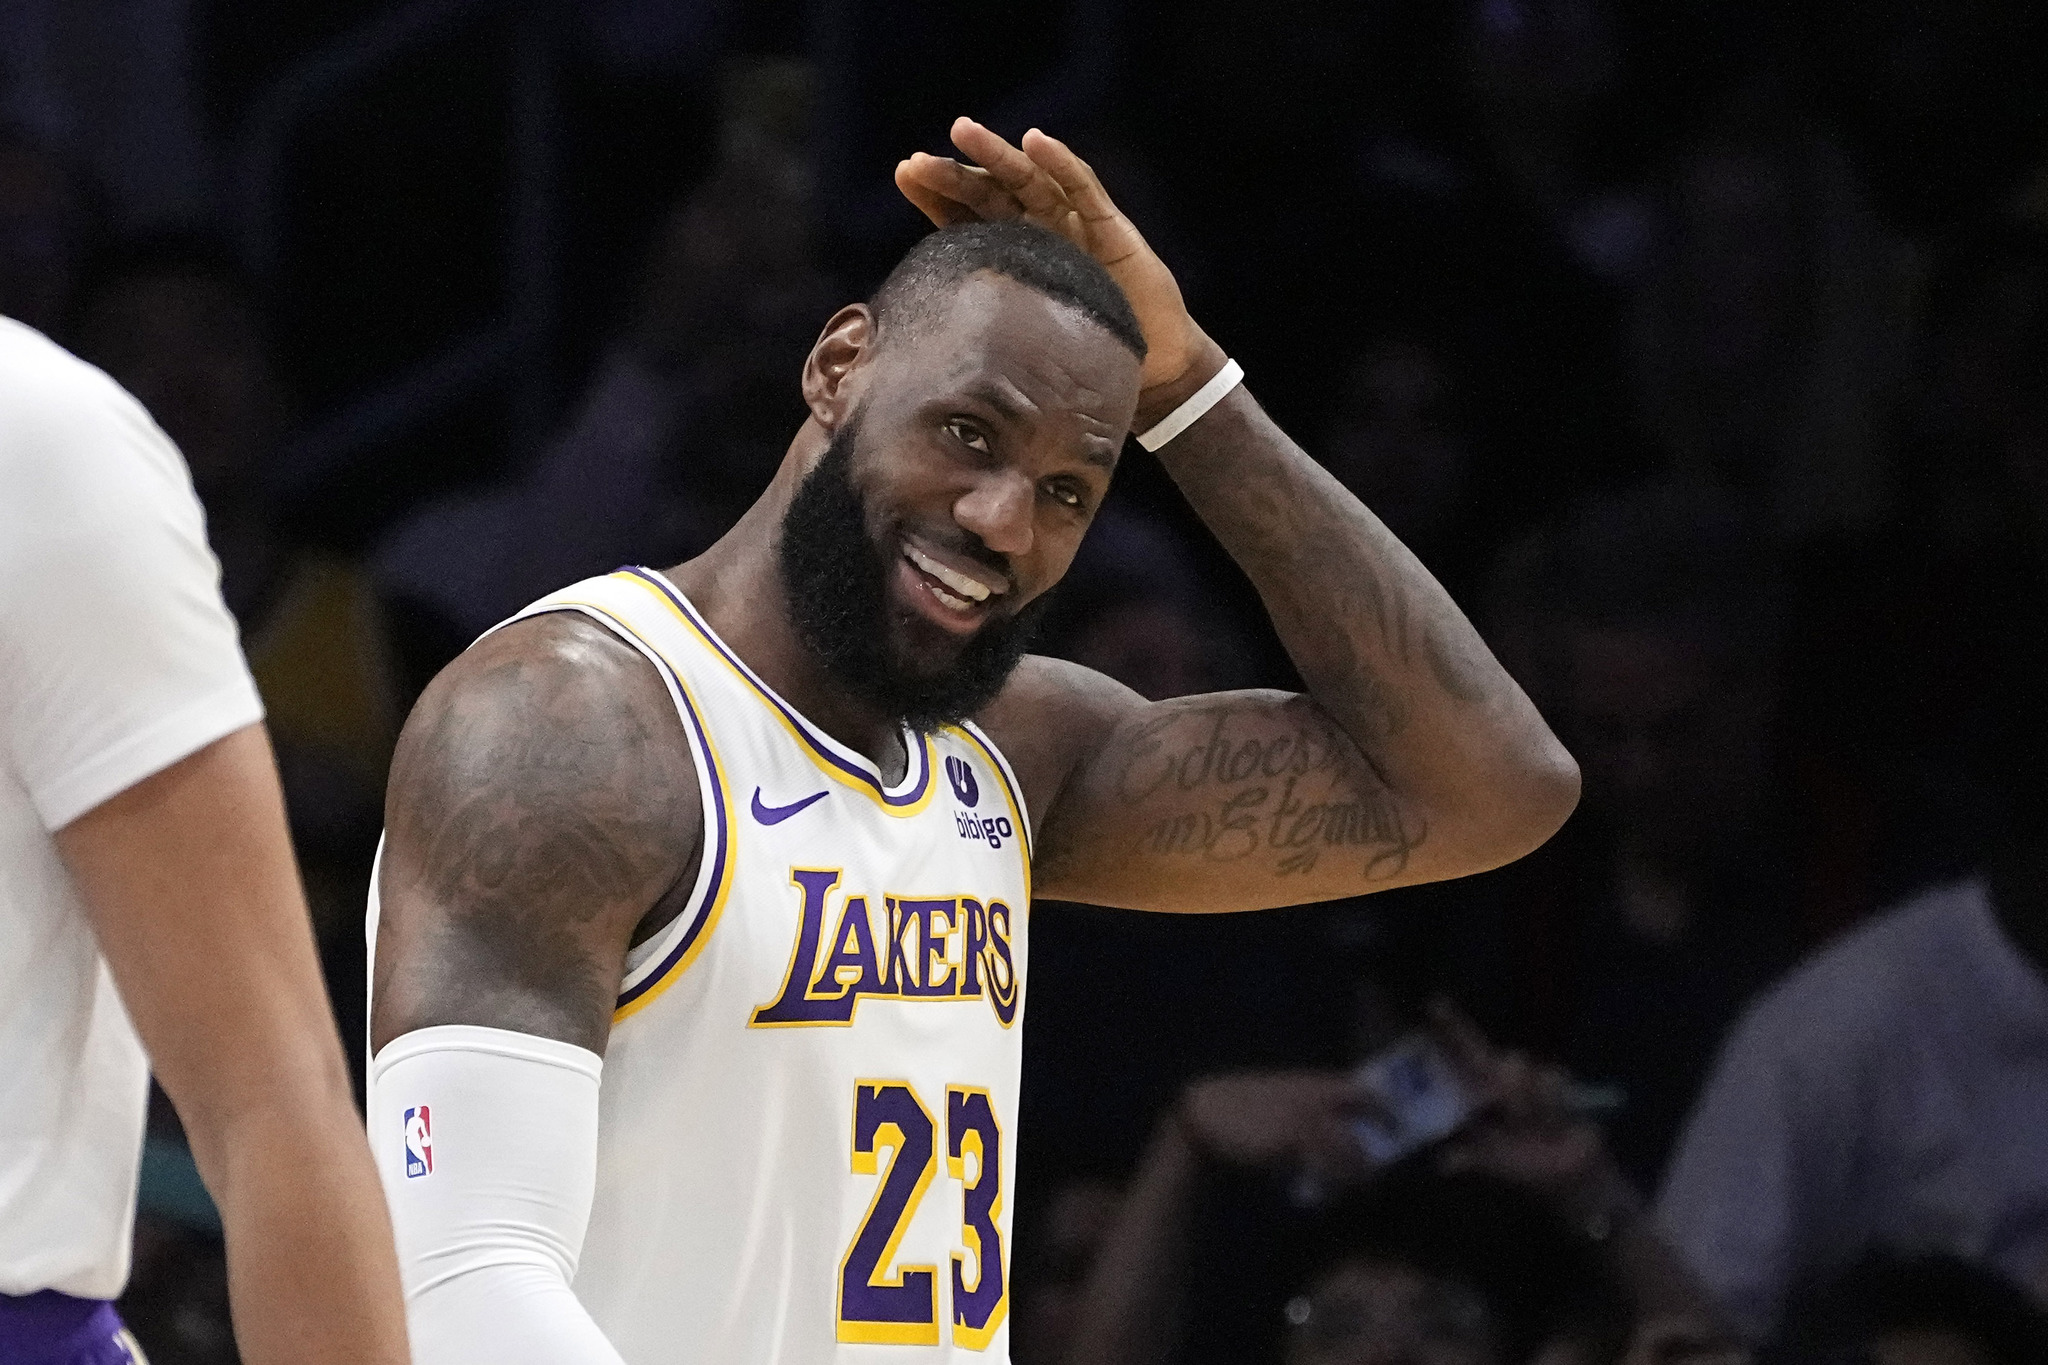 Los Angeles Lakers forward LeBron James smiles after scoring